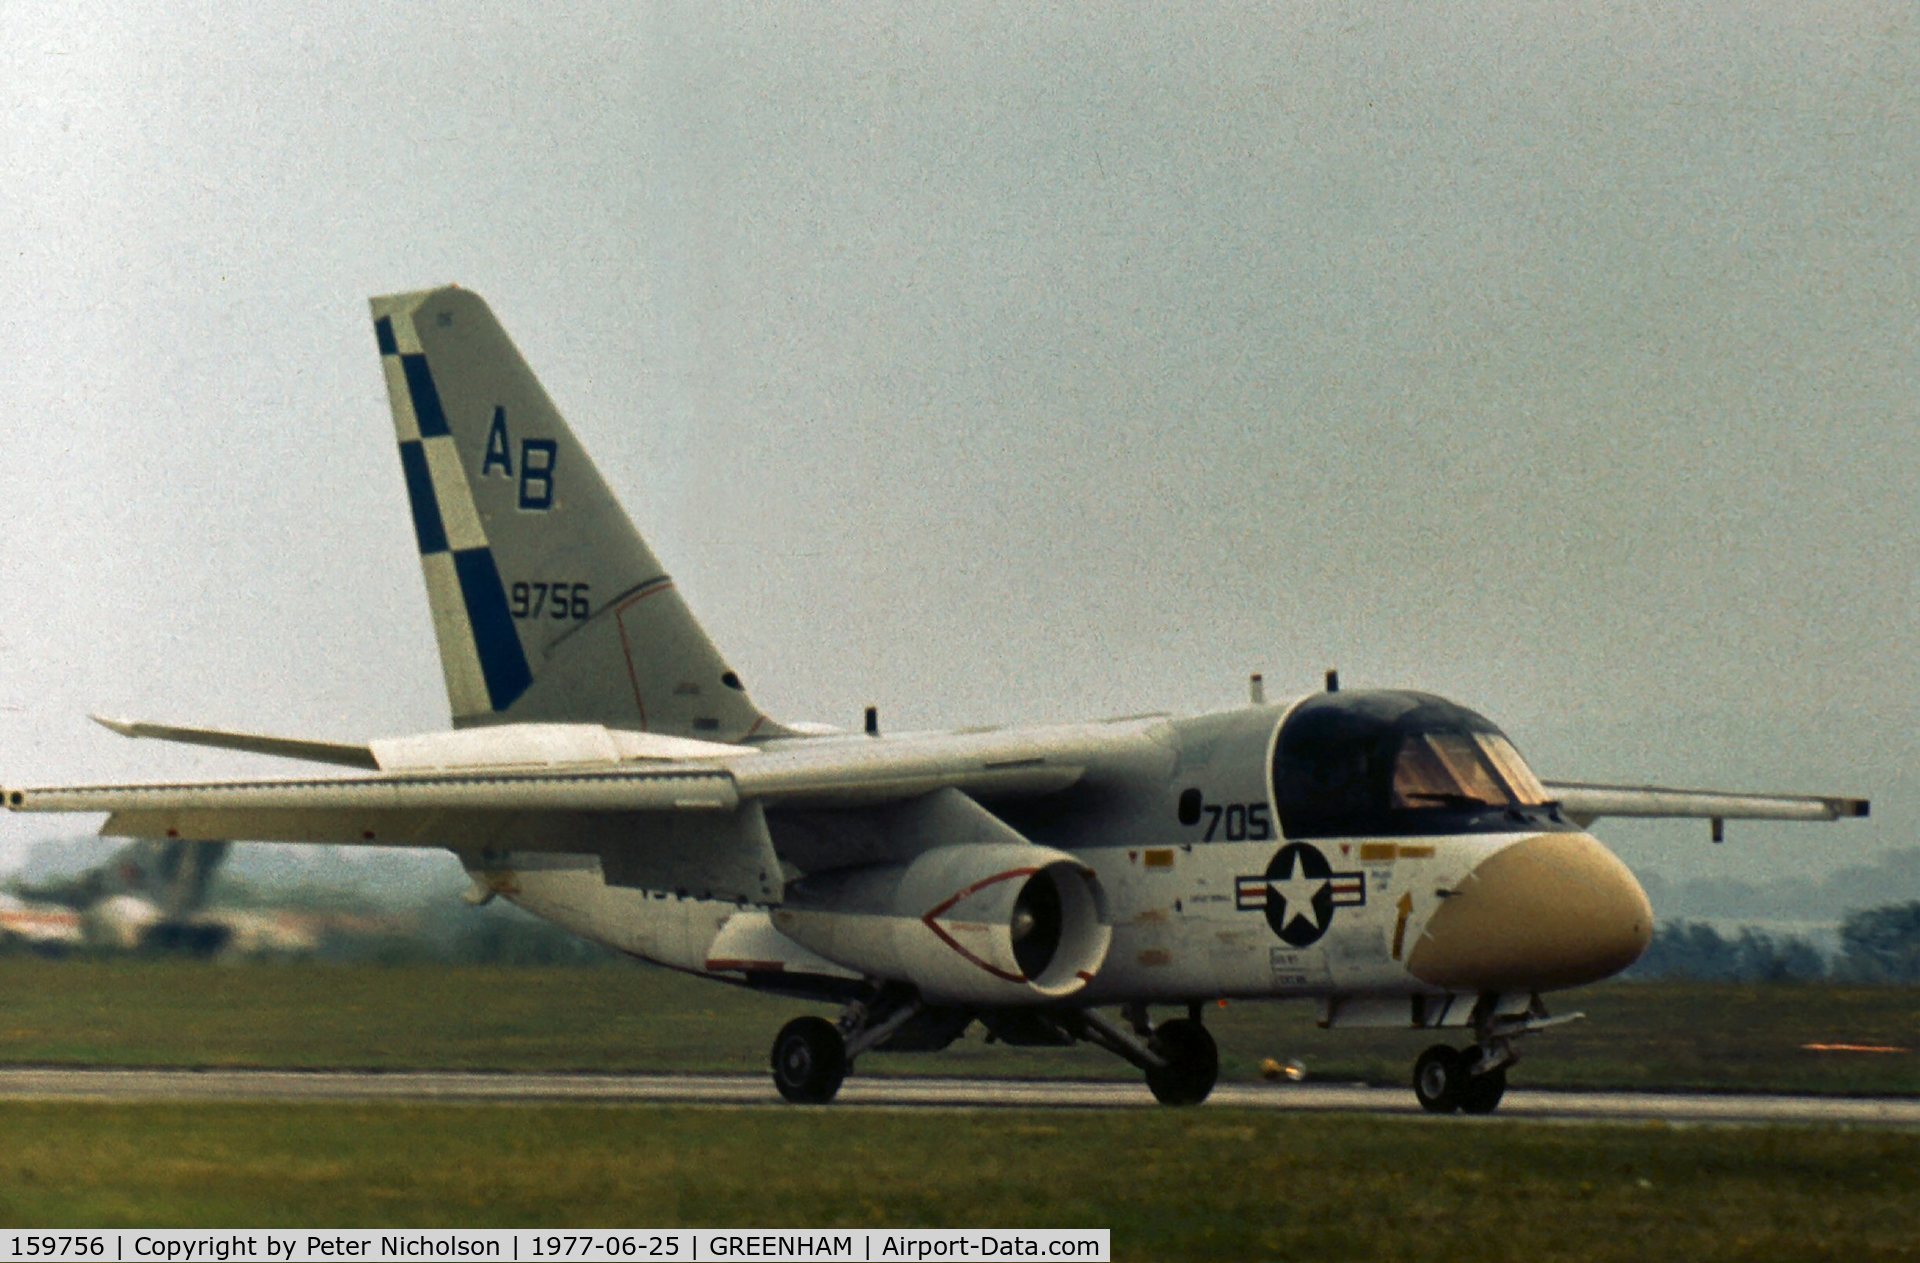 159756, Lockheed S-3A Viking C/N 394A-3085, Another view of the VS-32 S-3A Viking at the 1977 Intnl Air Tattoo at RAF Greenham Common.